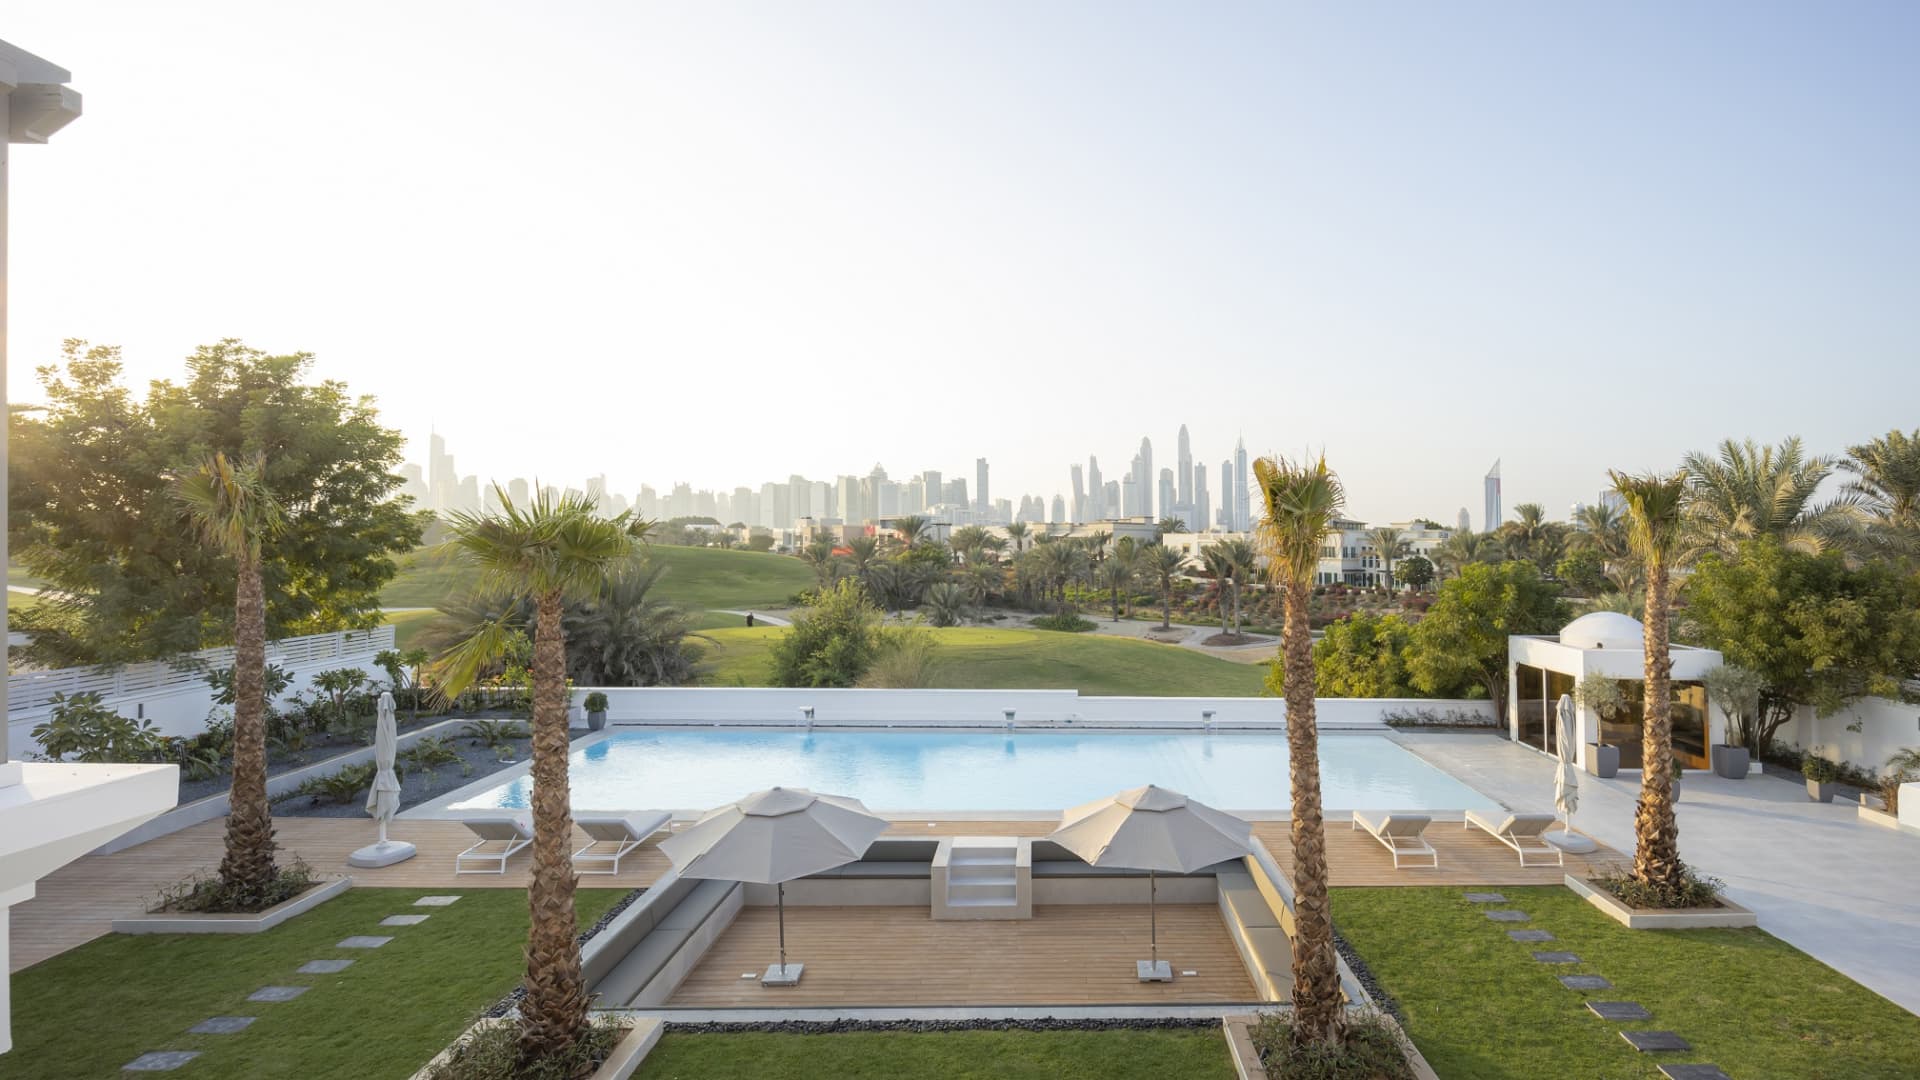 Vacation Rentals Across the Middle East Seems to Exploit “Revenge Tourism”